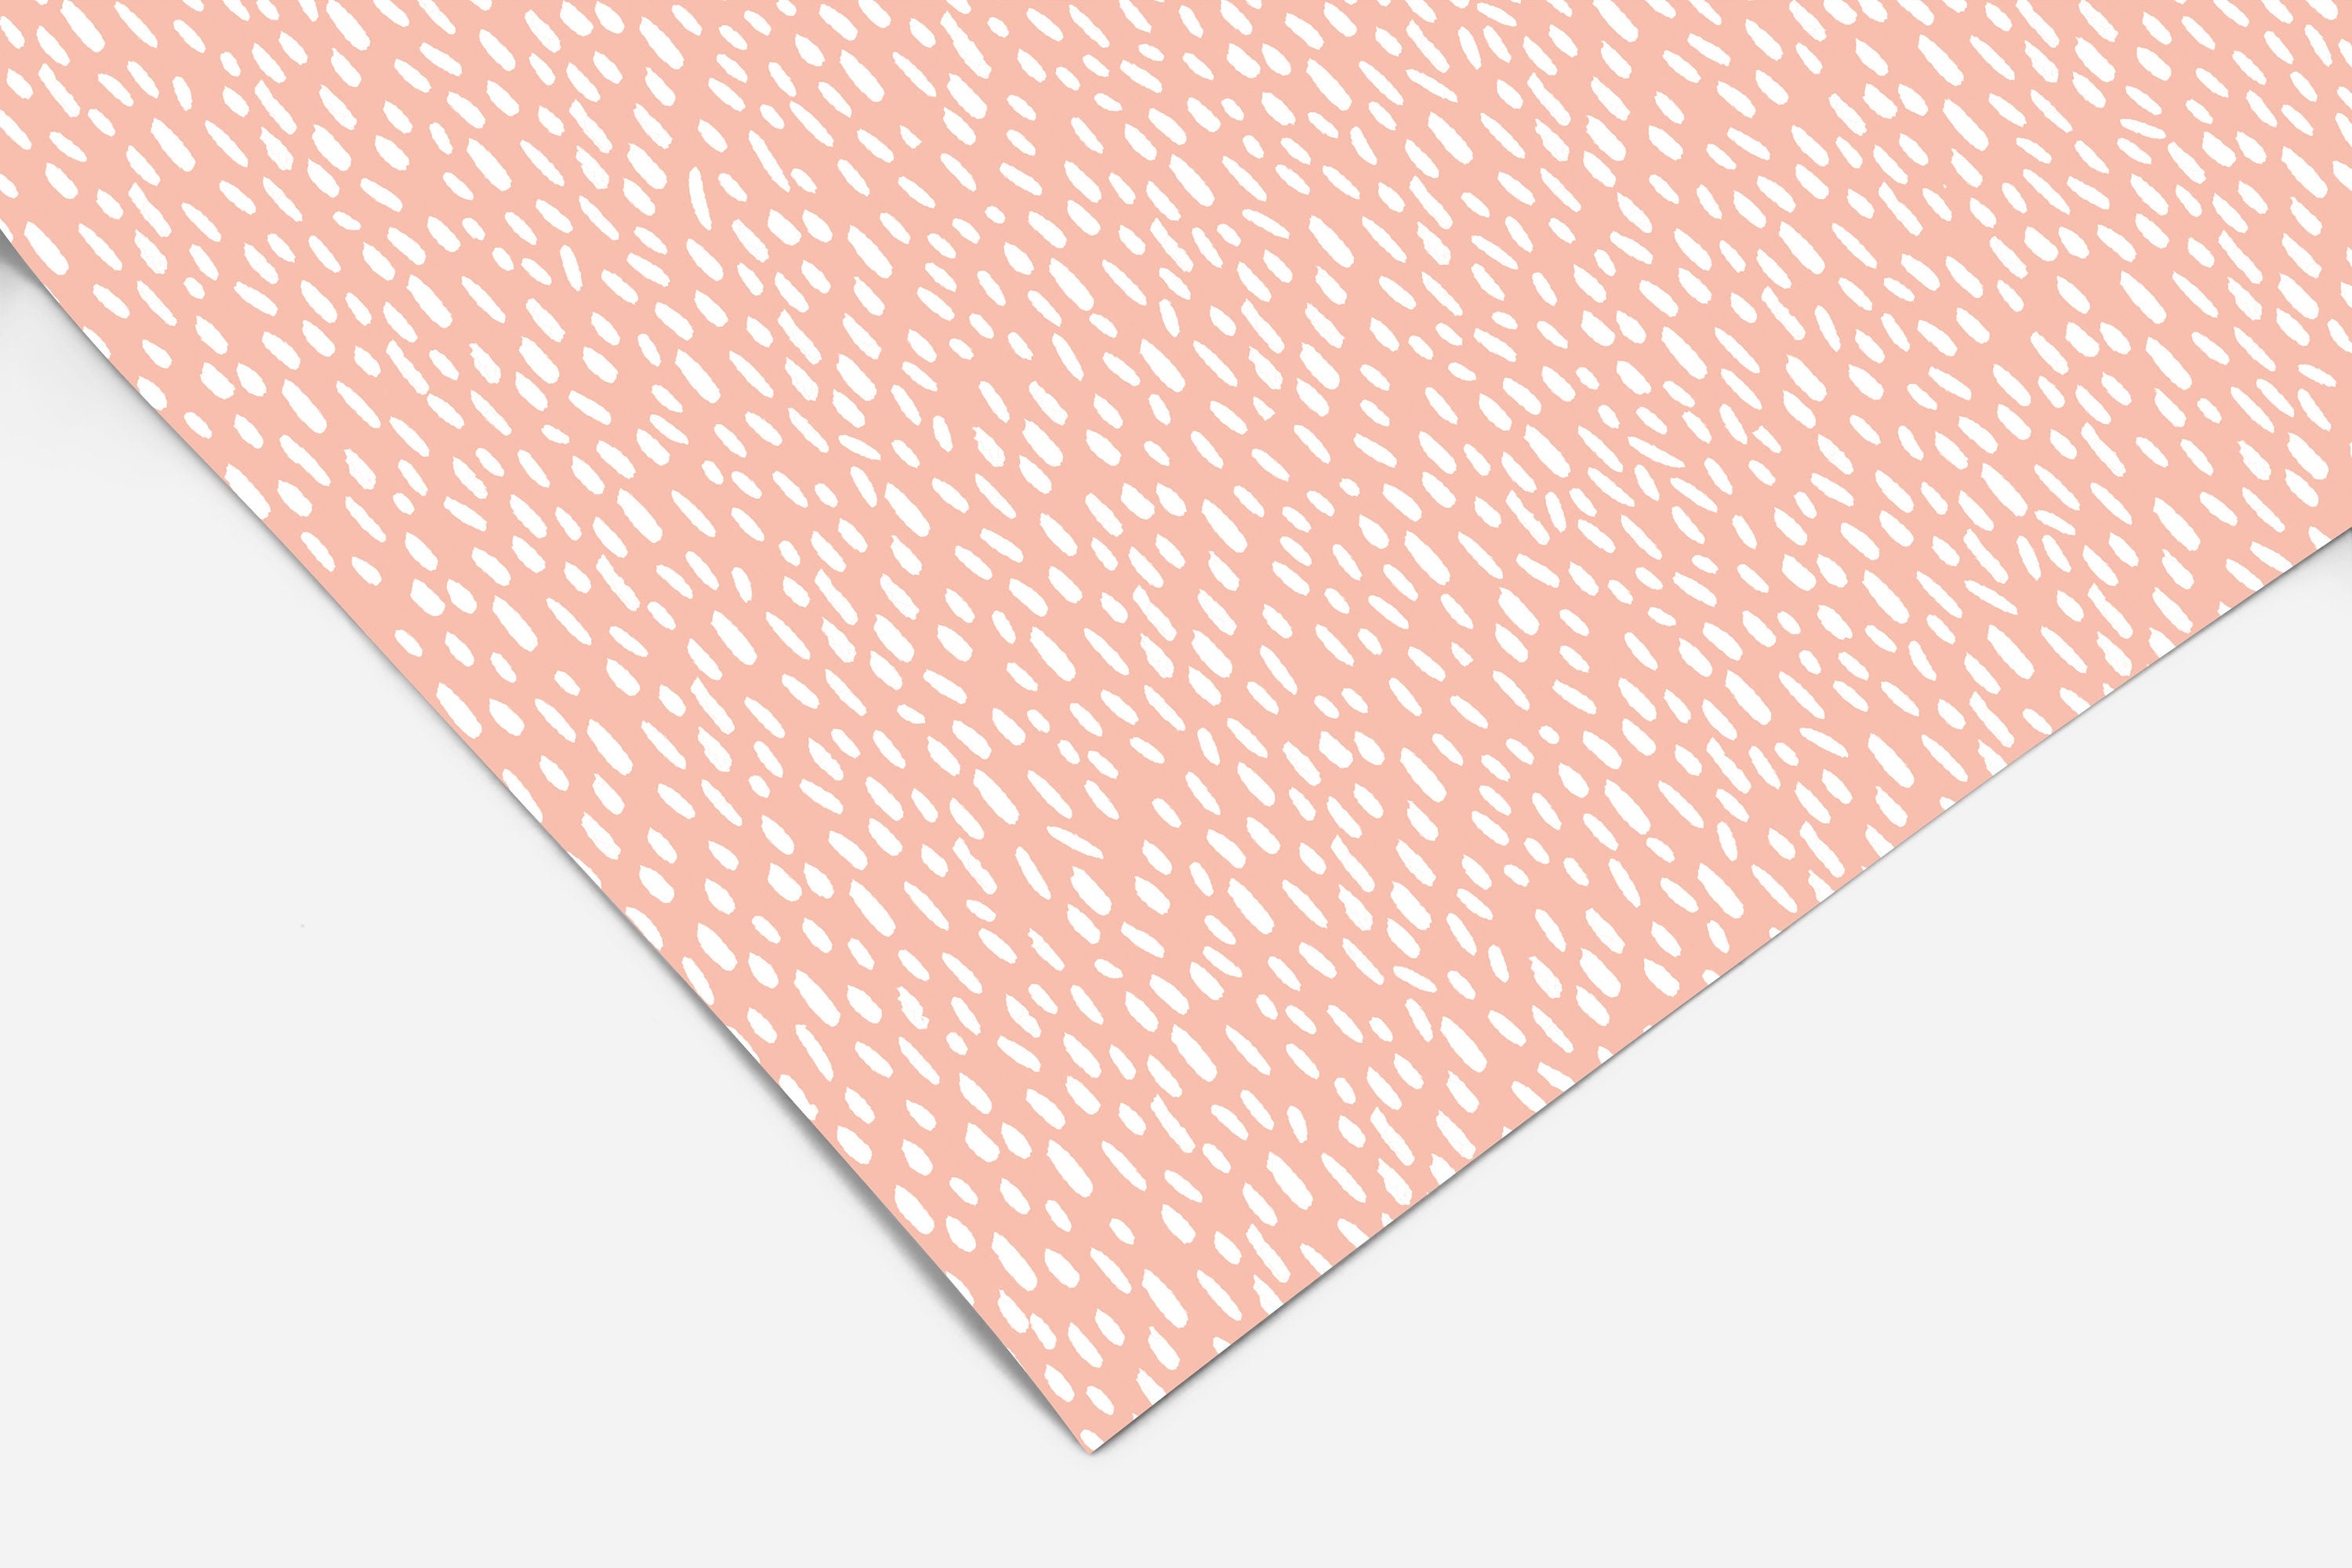 Peach Pink Drawn Line Contact Paper | Peel And Stick Wallpaper | Removable Wallpaper | Shelf Liner | Drawer Liner | Peel and Stick Paper 433 - JamesAndColors